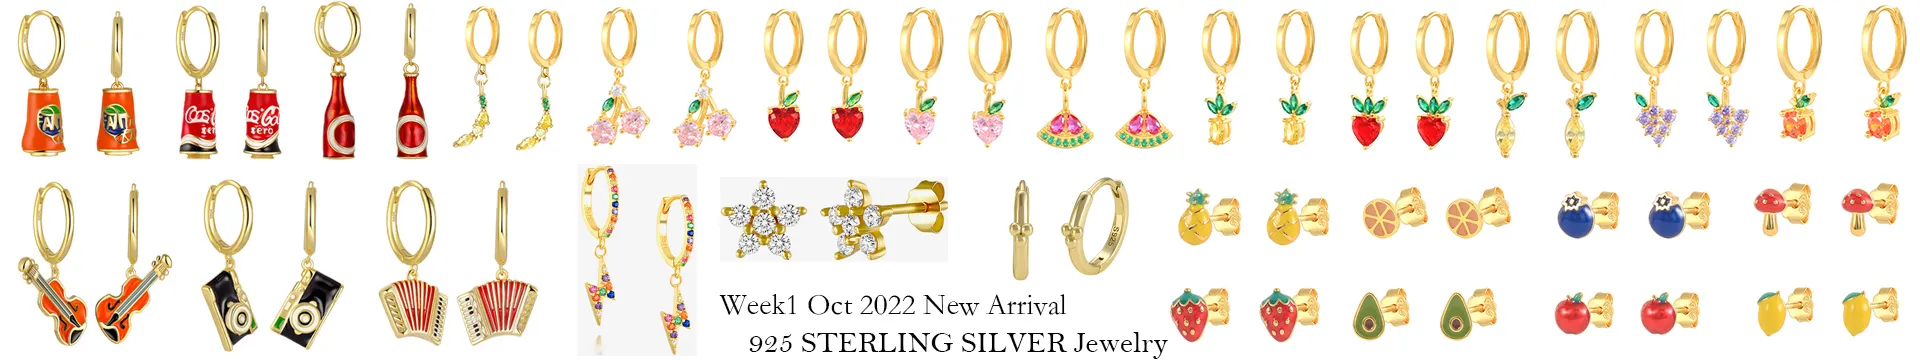 Wholesale 925 Silver Jewelry | Week1 Oct 2022 New Arrival